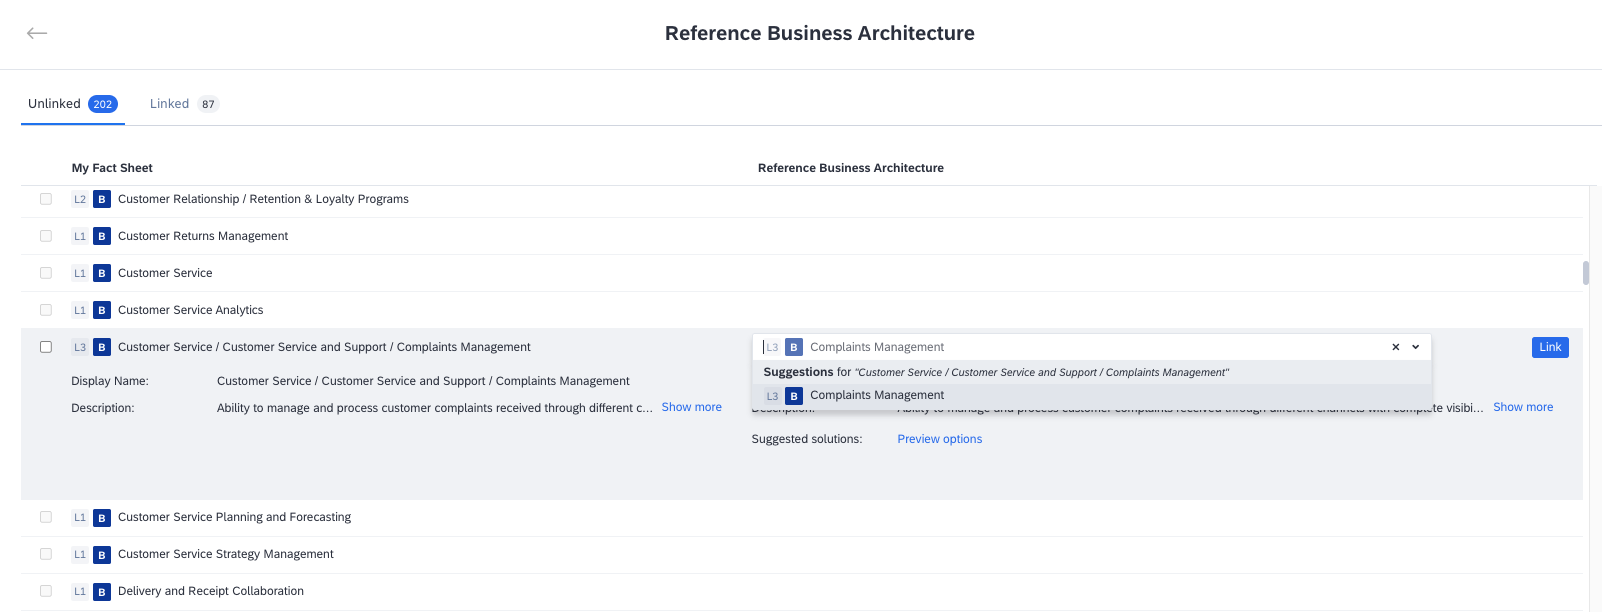 Linking Reference Business Architecture Items to Business Capability Fact Sheets in Bulk